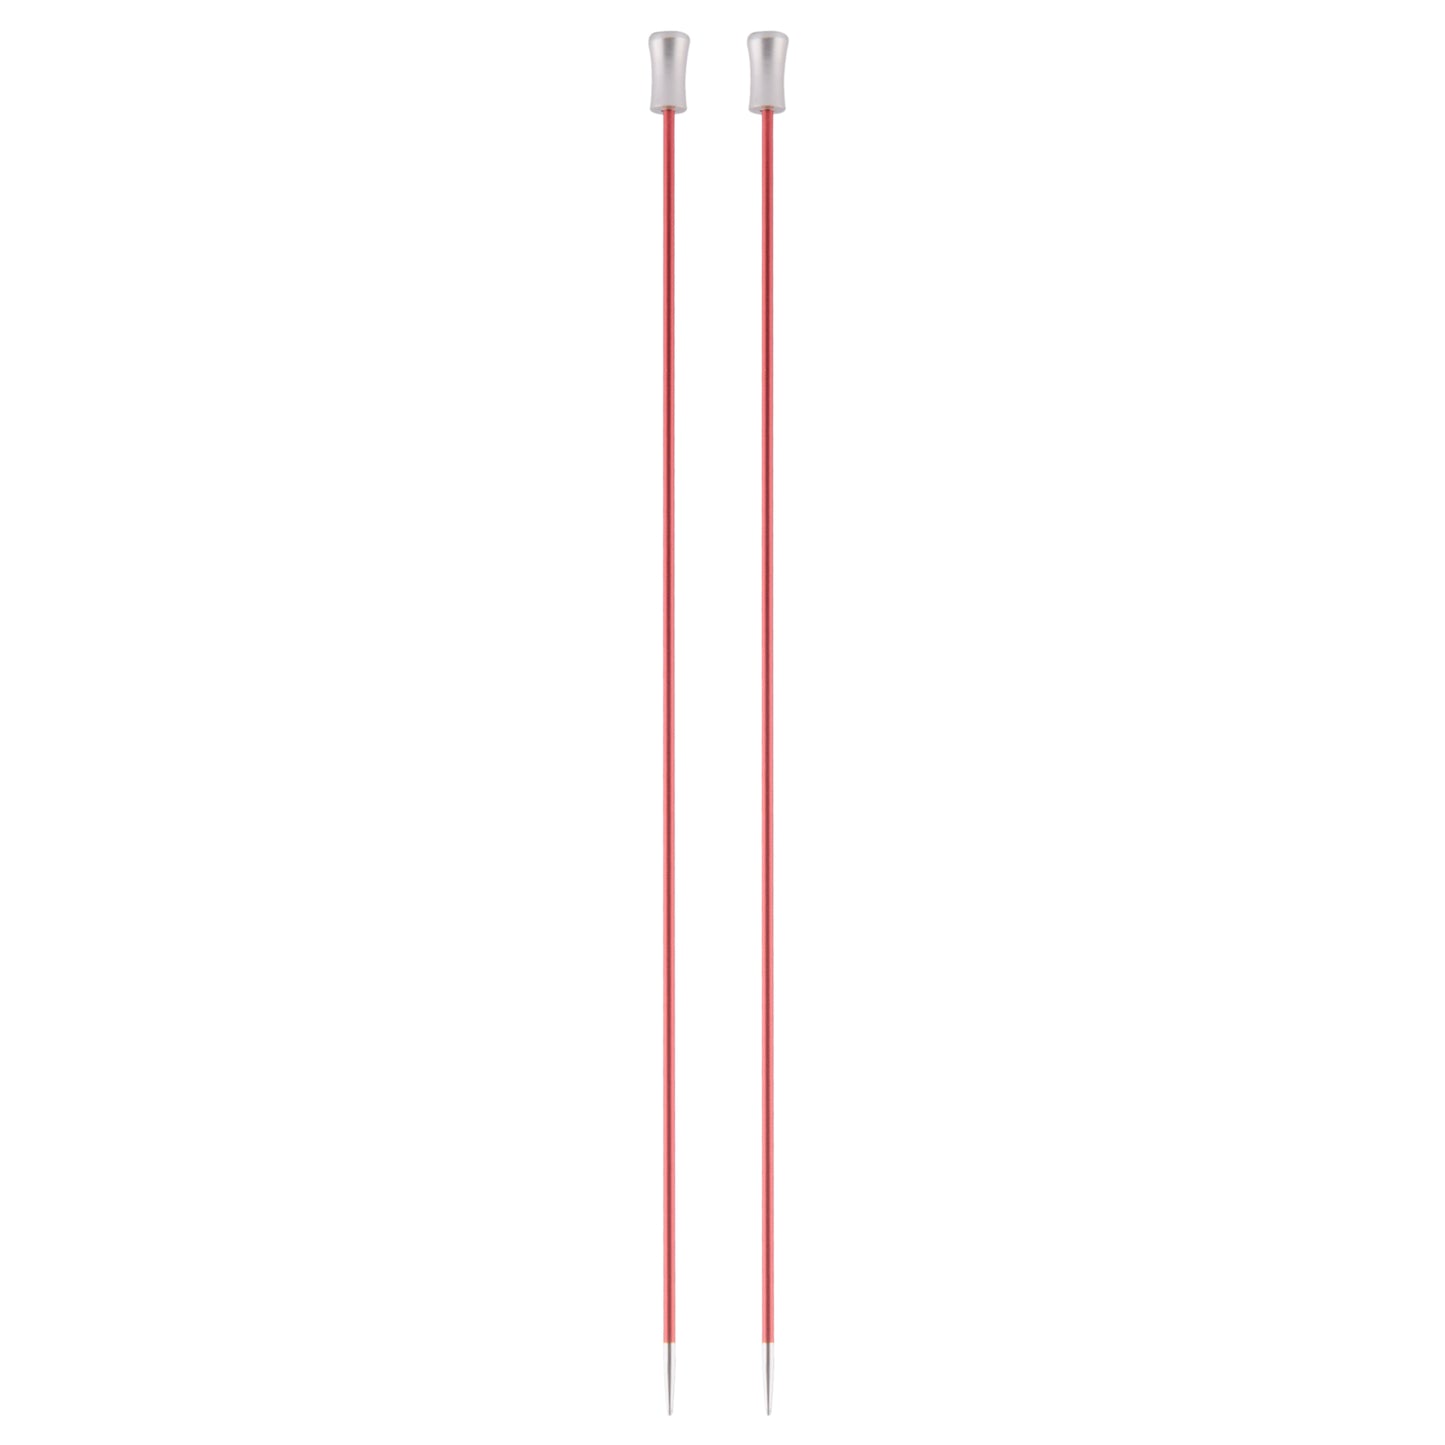 Zing Knitting Needles - High Quality Single Ended Pins by KnitPro - Various Sizes